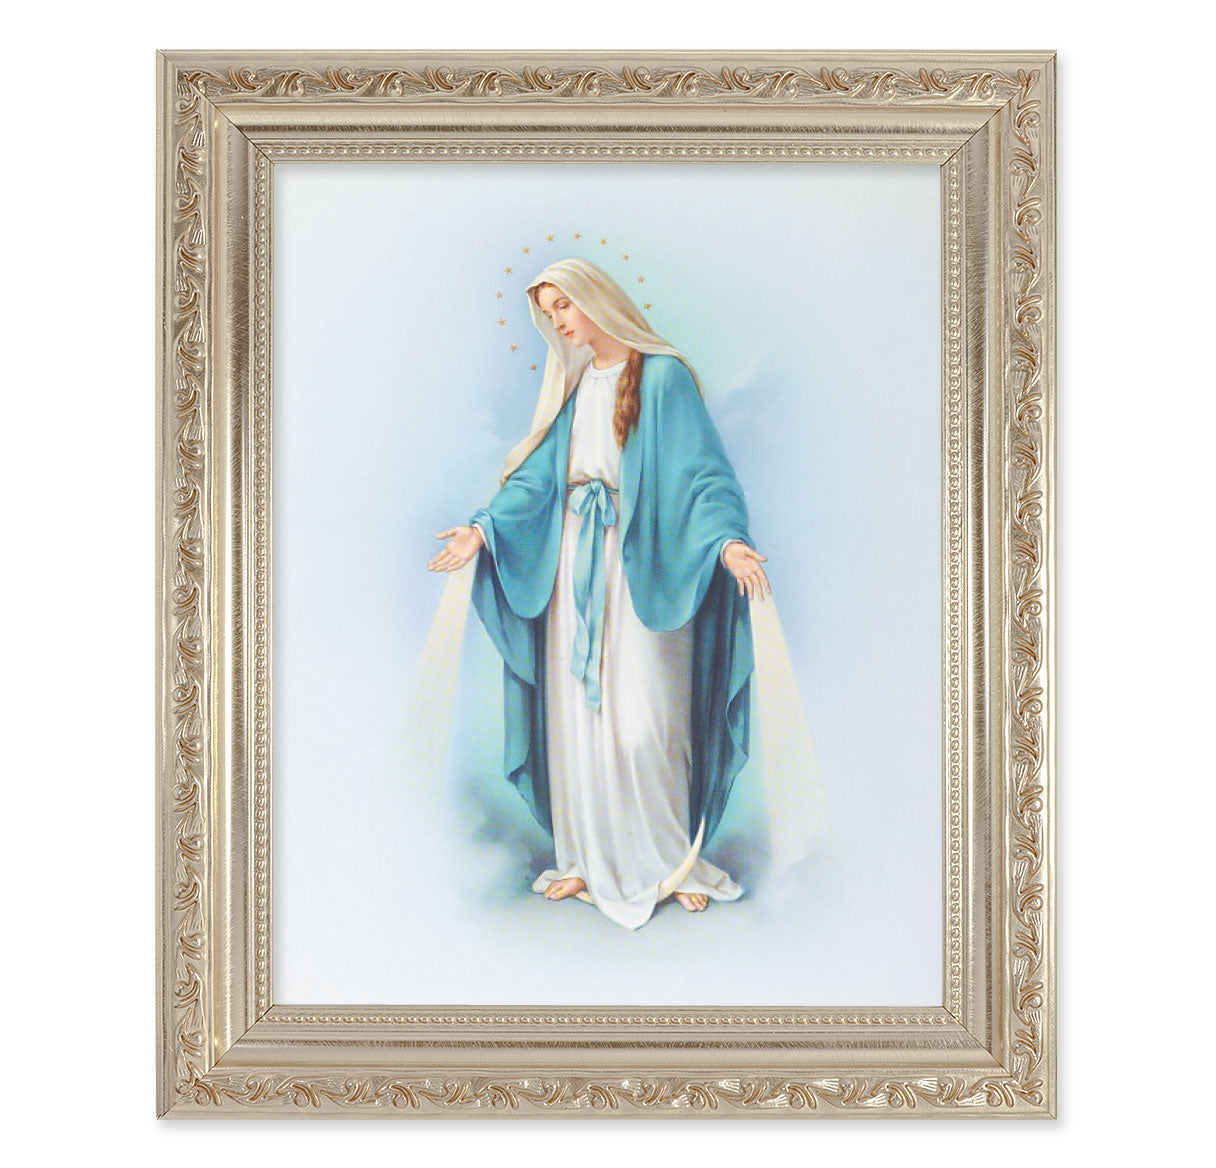 Our Lady of Grace Antique Silver Framed Art